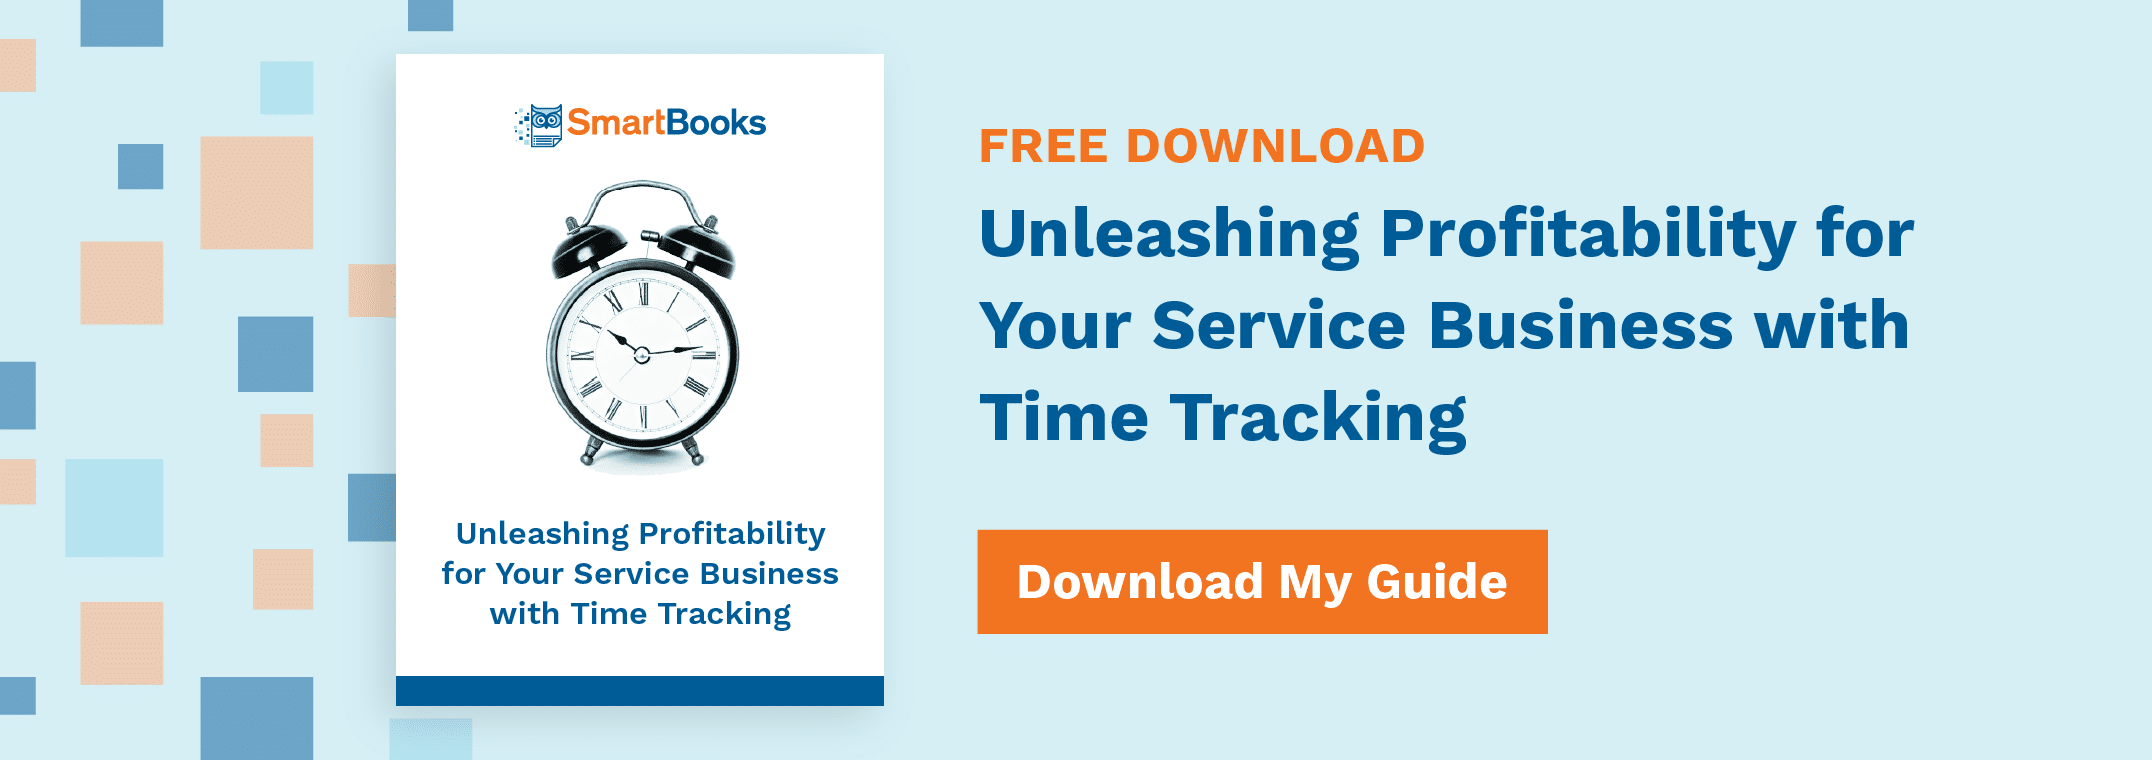 Unleashing Profitability for Your Service Business with Time Tracking